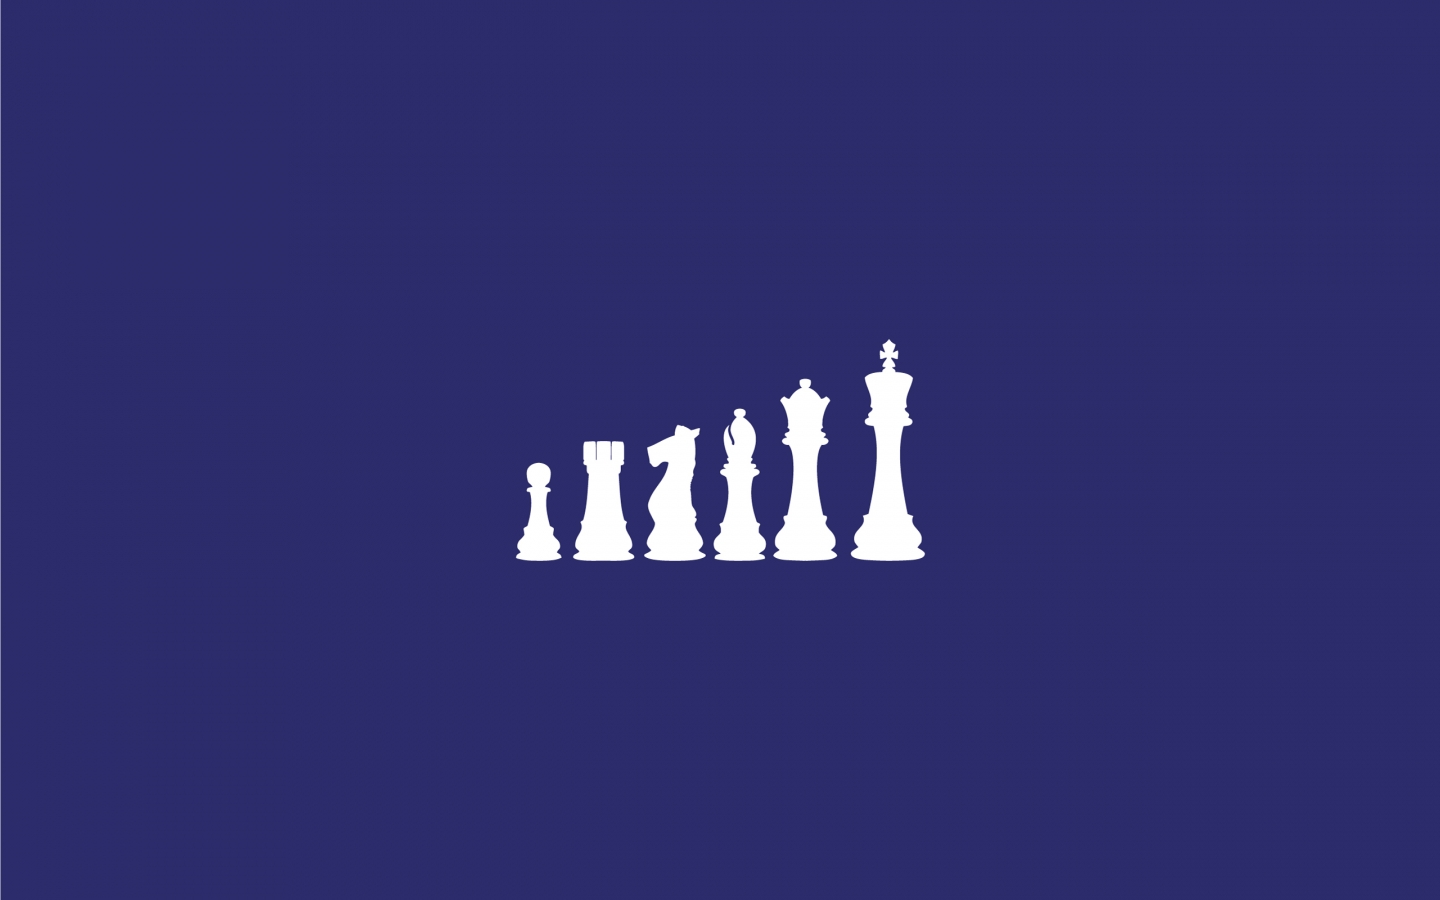 Chess Figures for 1440 x 900 widescreen resolution